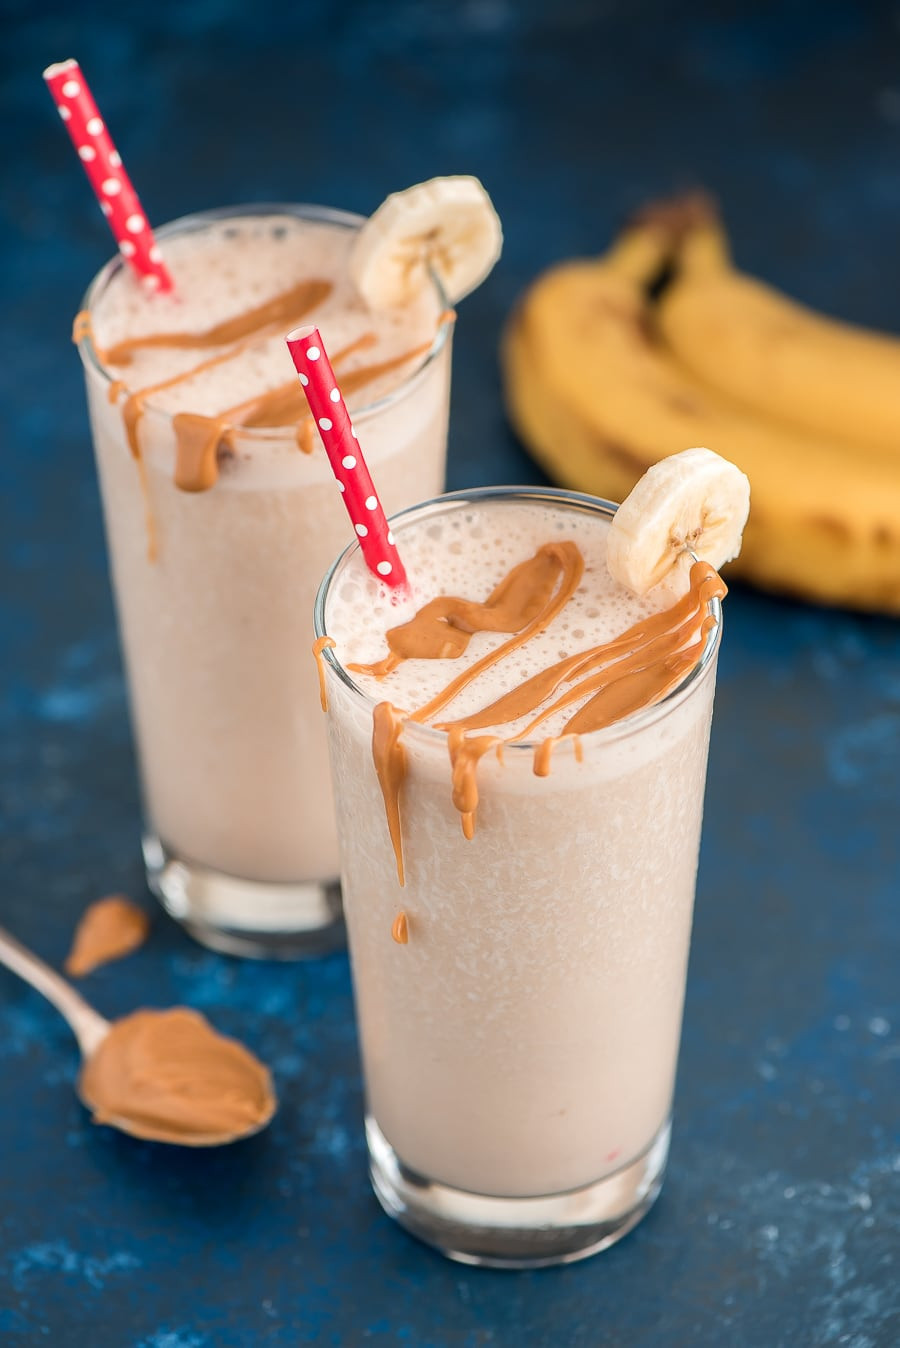 Peanut Butter Smoothie Recipes
 Peanut Butter Banana Smoothie Recipe Healthy & Delicious